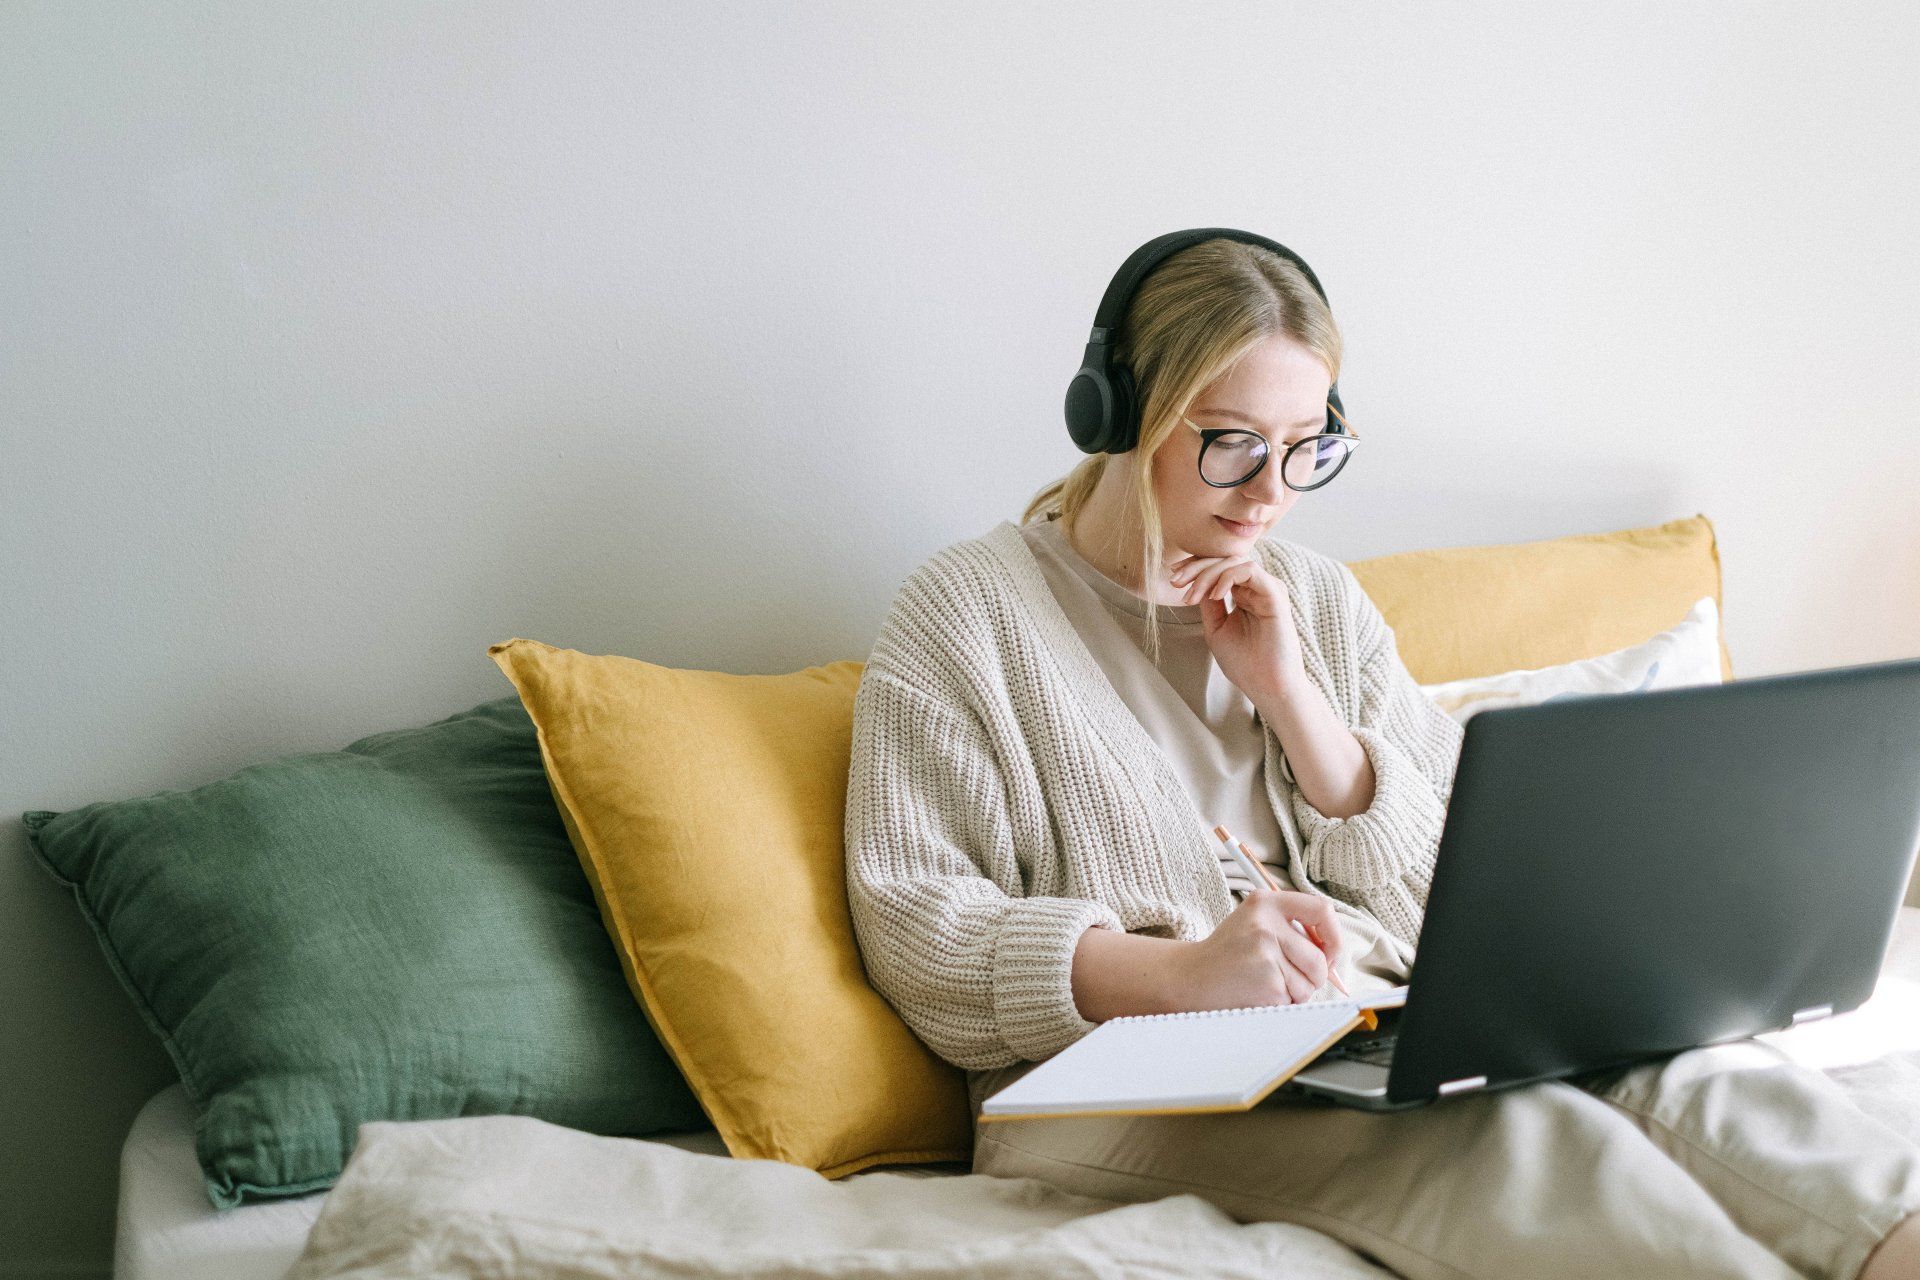 a woman wearing headphones sits on a bed using a laptop